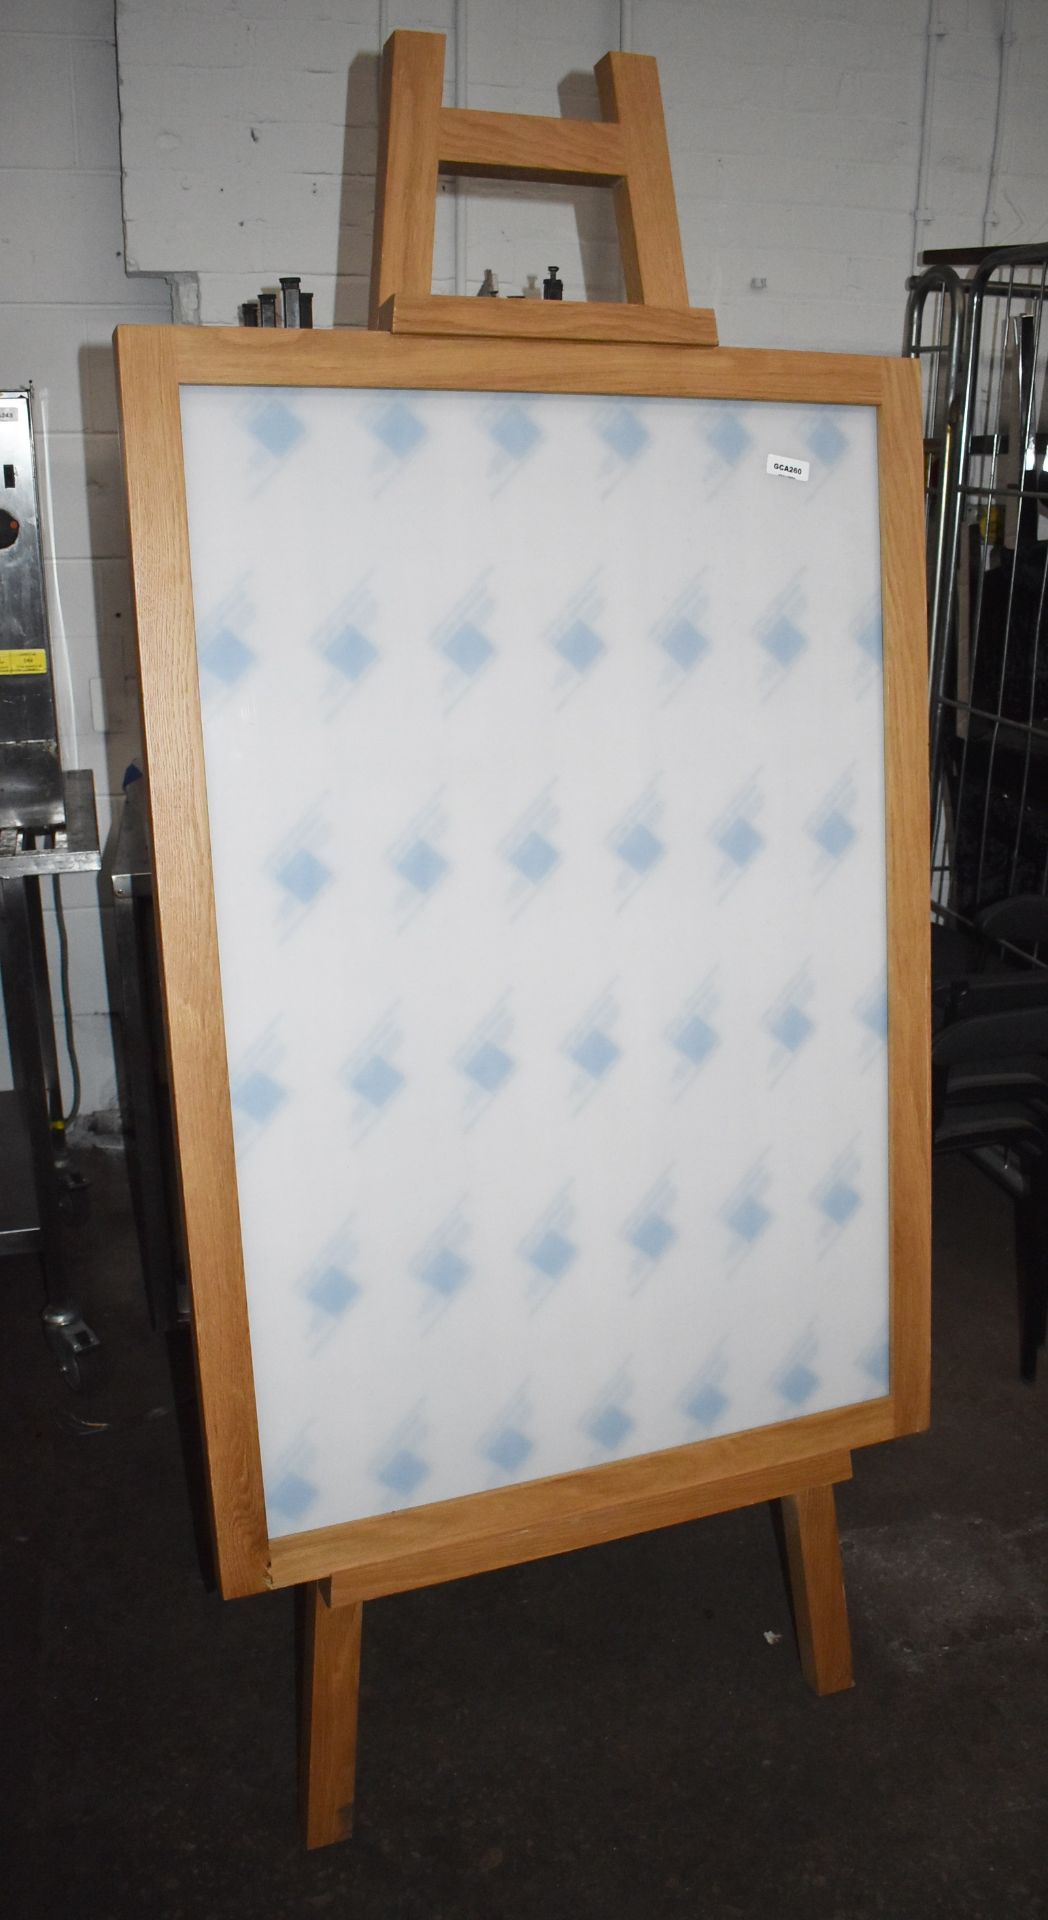 1 x Large Solid Oak A Board - New and Unused With Perspex Poster Cover - As Seen in UK Major - Image 6 of 11